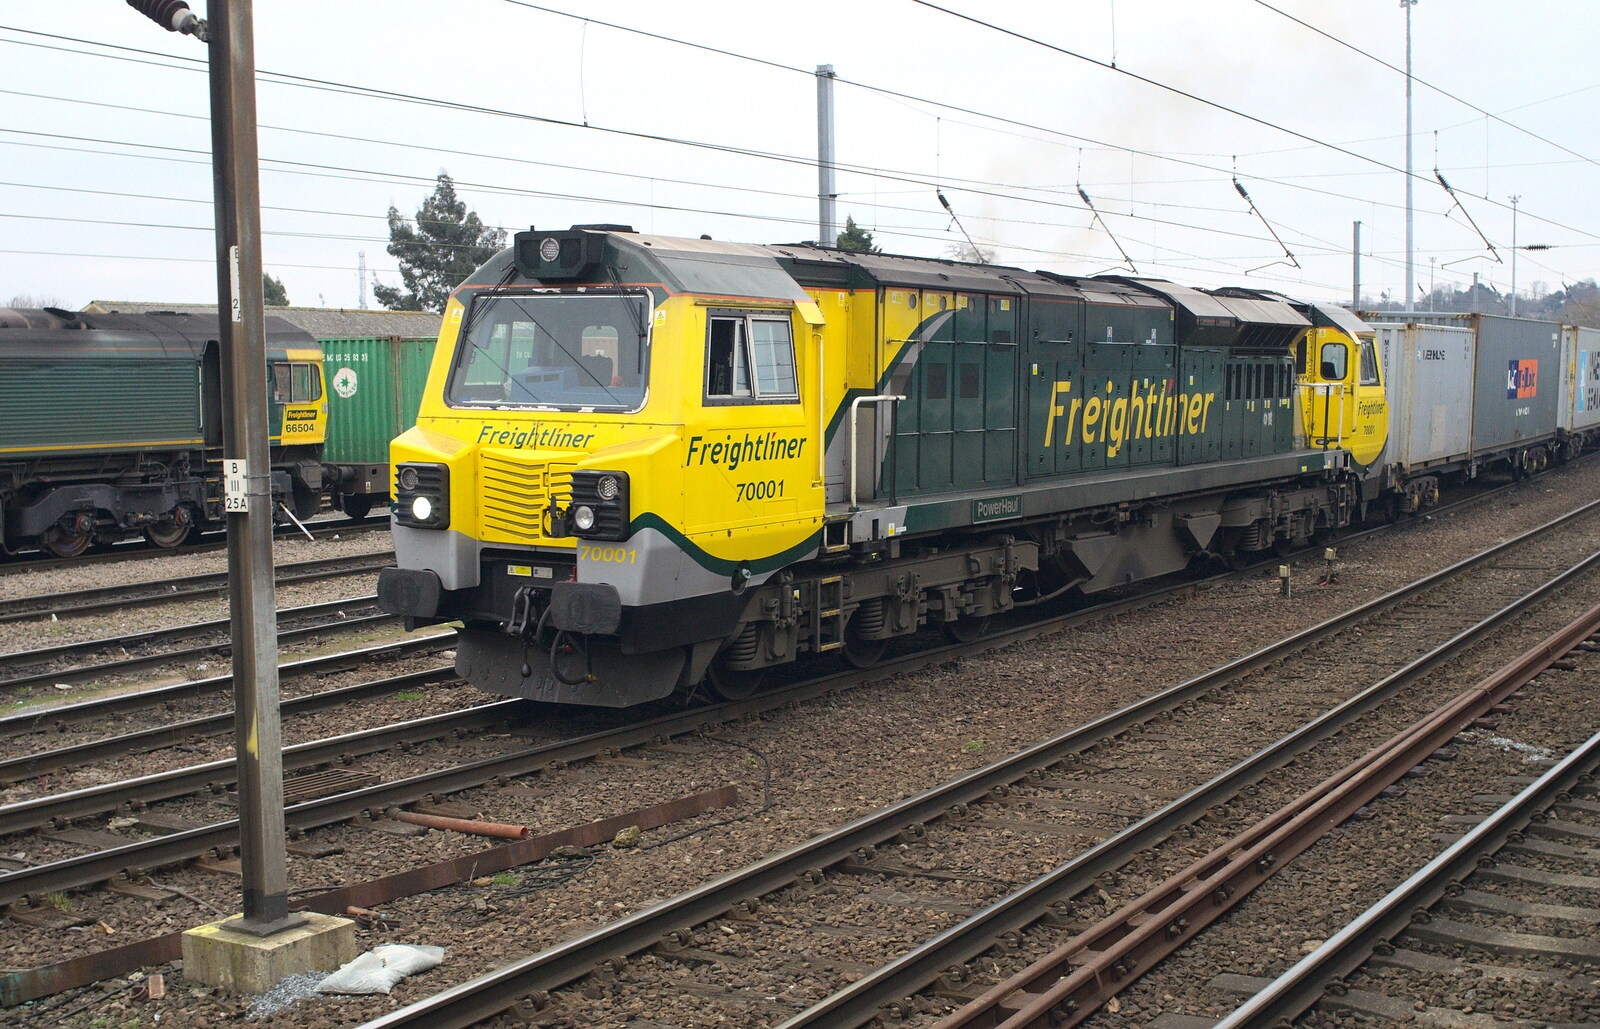 An American Class 70 loco, 70001 from The Demolition of the Bacon Factory, Ipswich, Suffolk - 20th February 2013